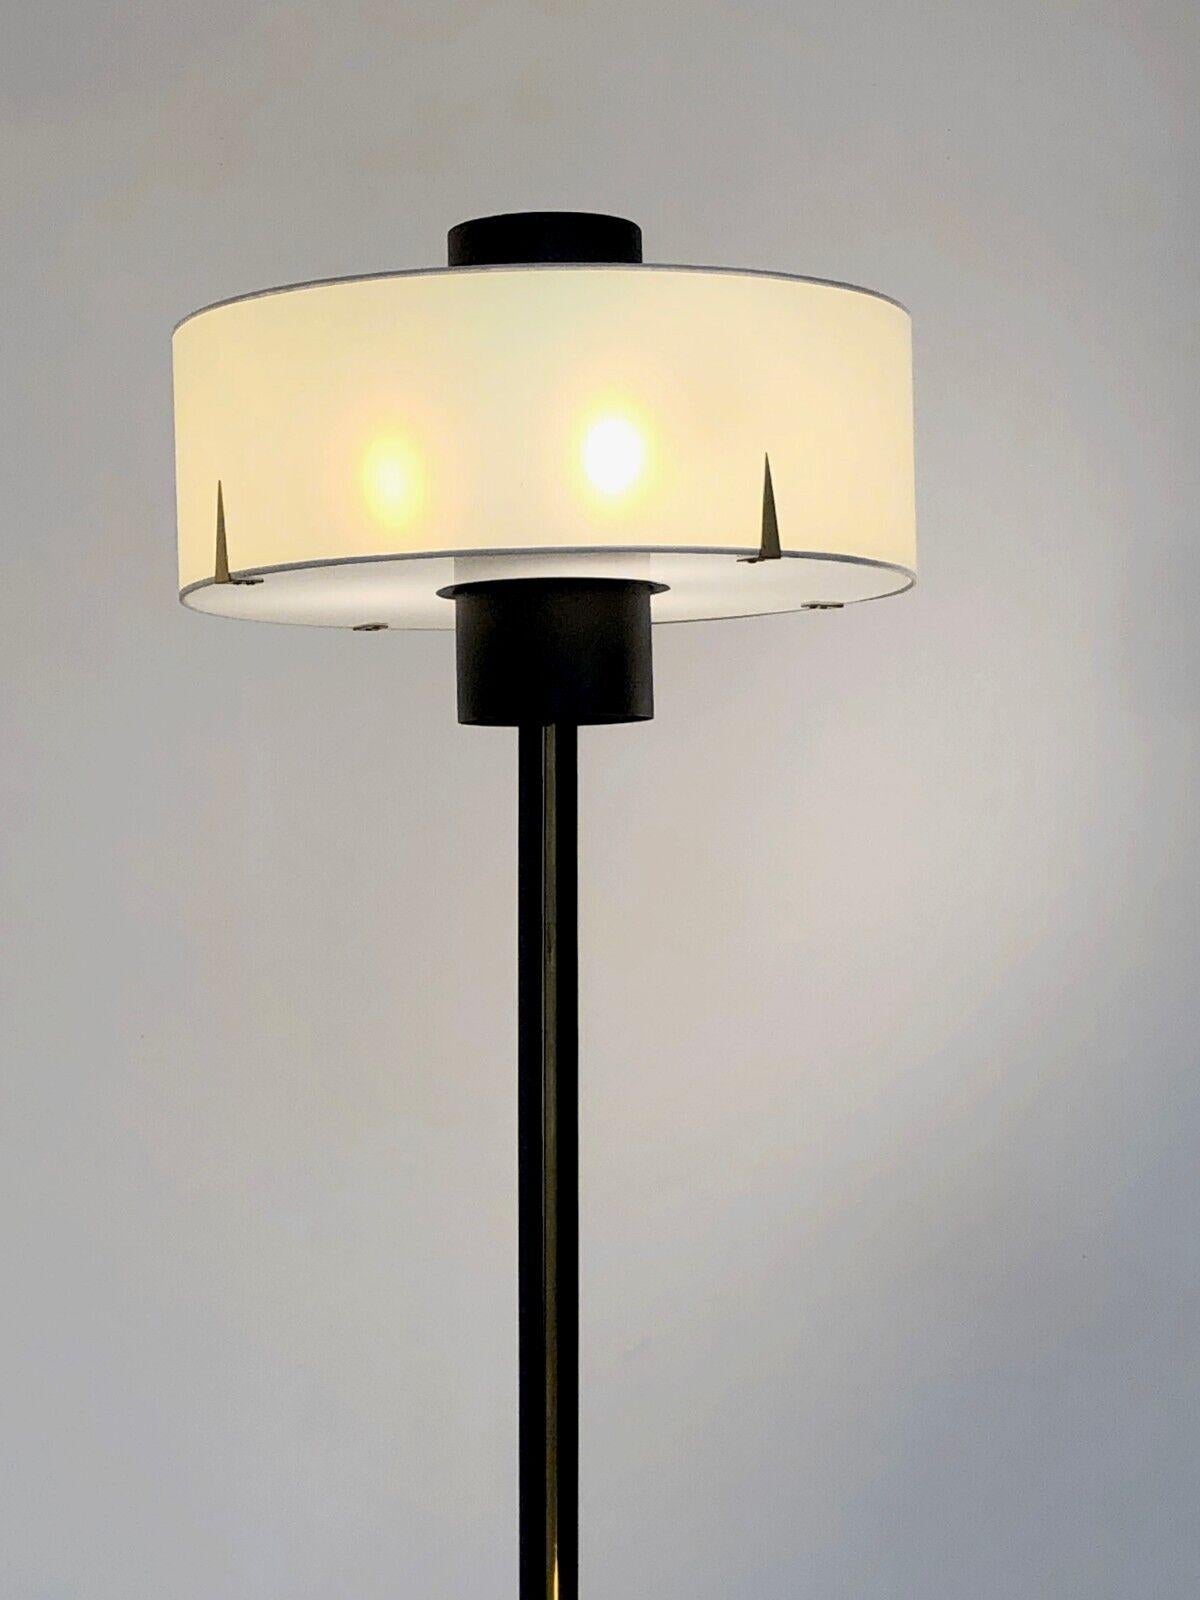 Mid-Century Modern A MID-CENTURY-MODERN MODERNIST Tripod FLOOR LAMP by MAISON ARLUS, France 1950 For Sale